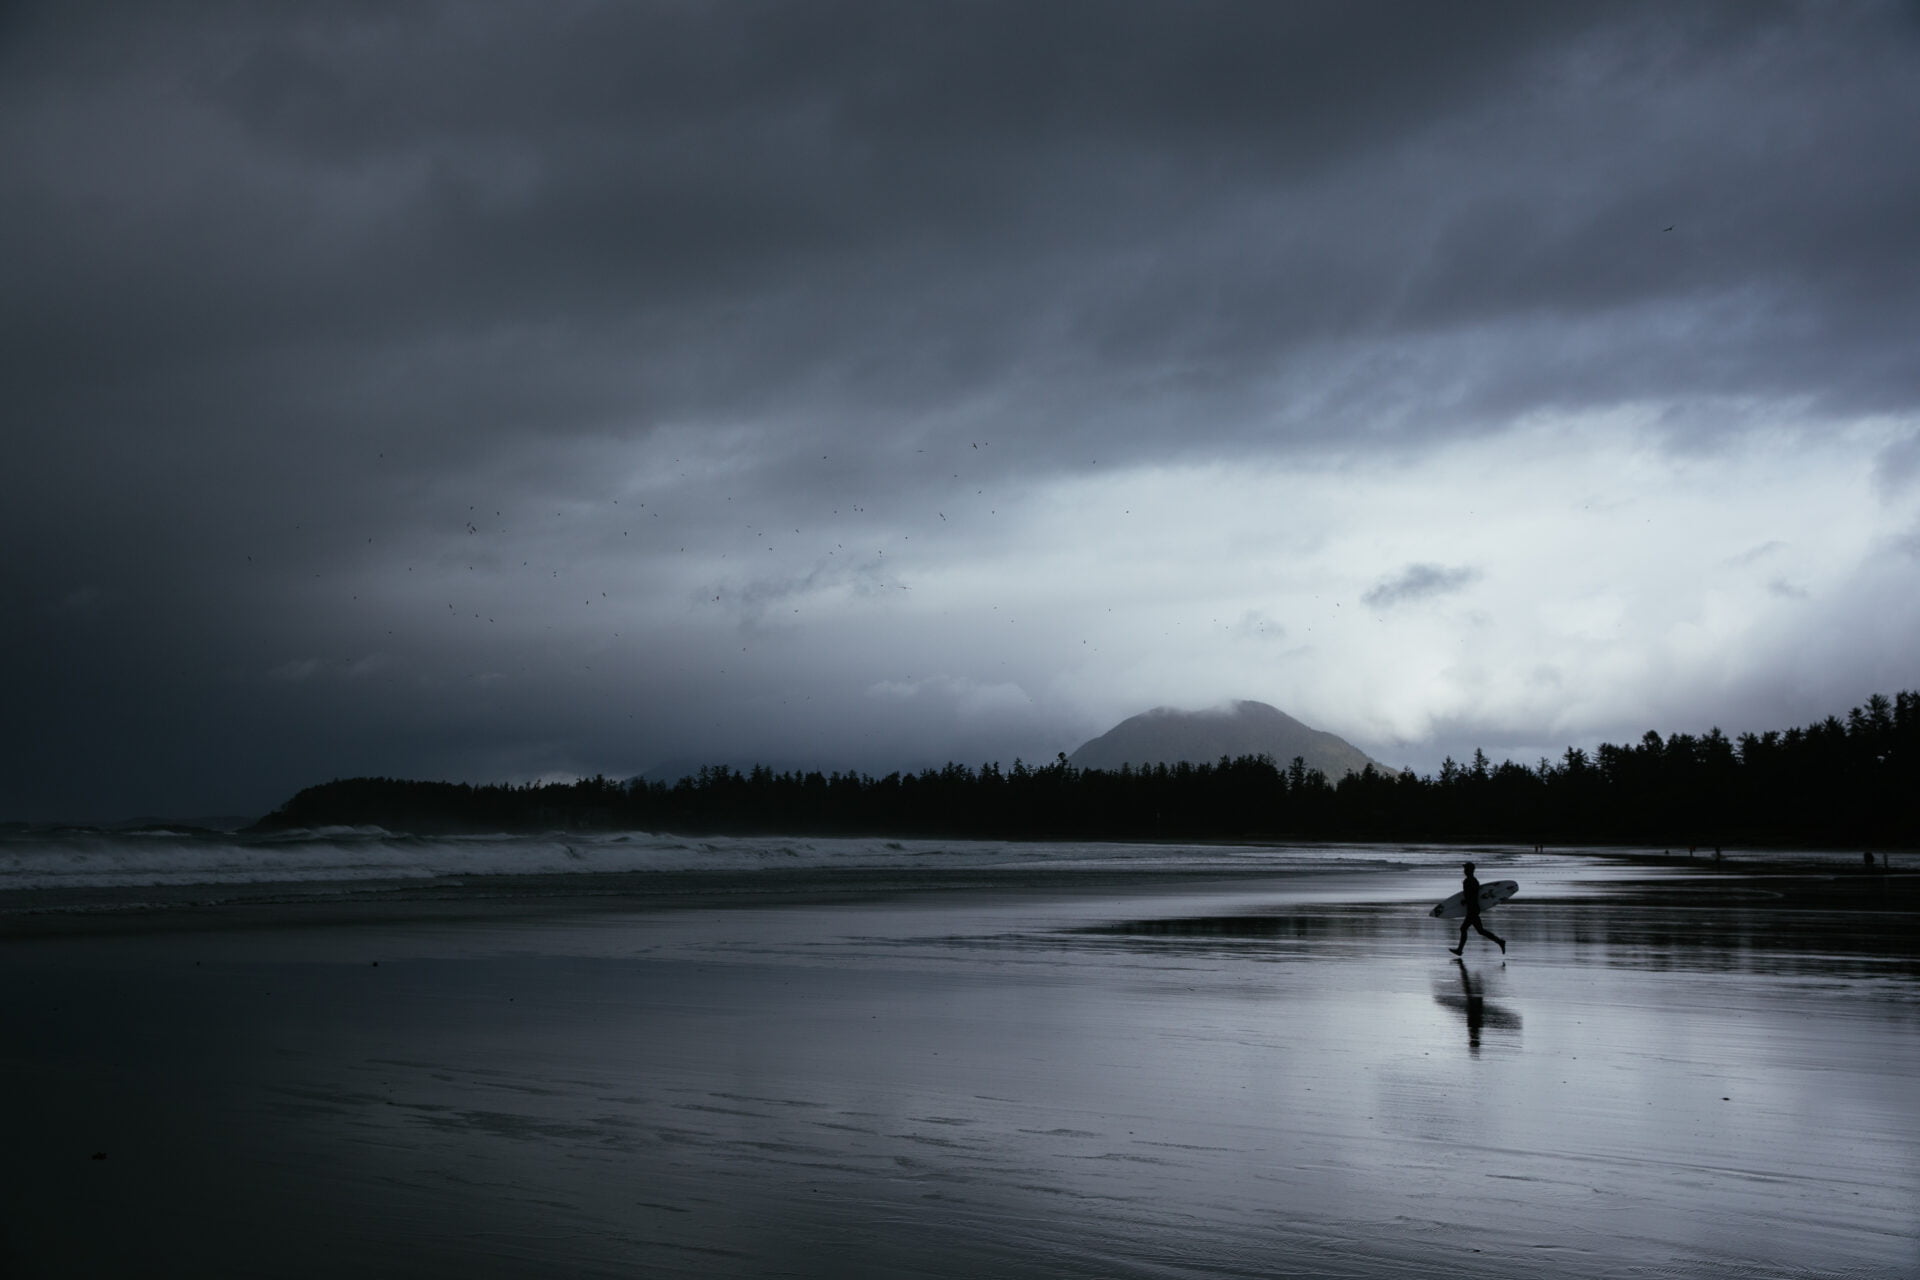 surfer carrying their surf board across chesterman beach, heading out towards the waves, on a dark and stormy day